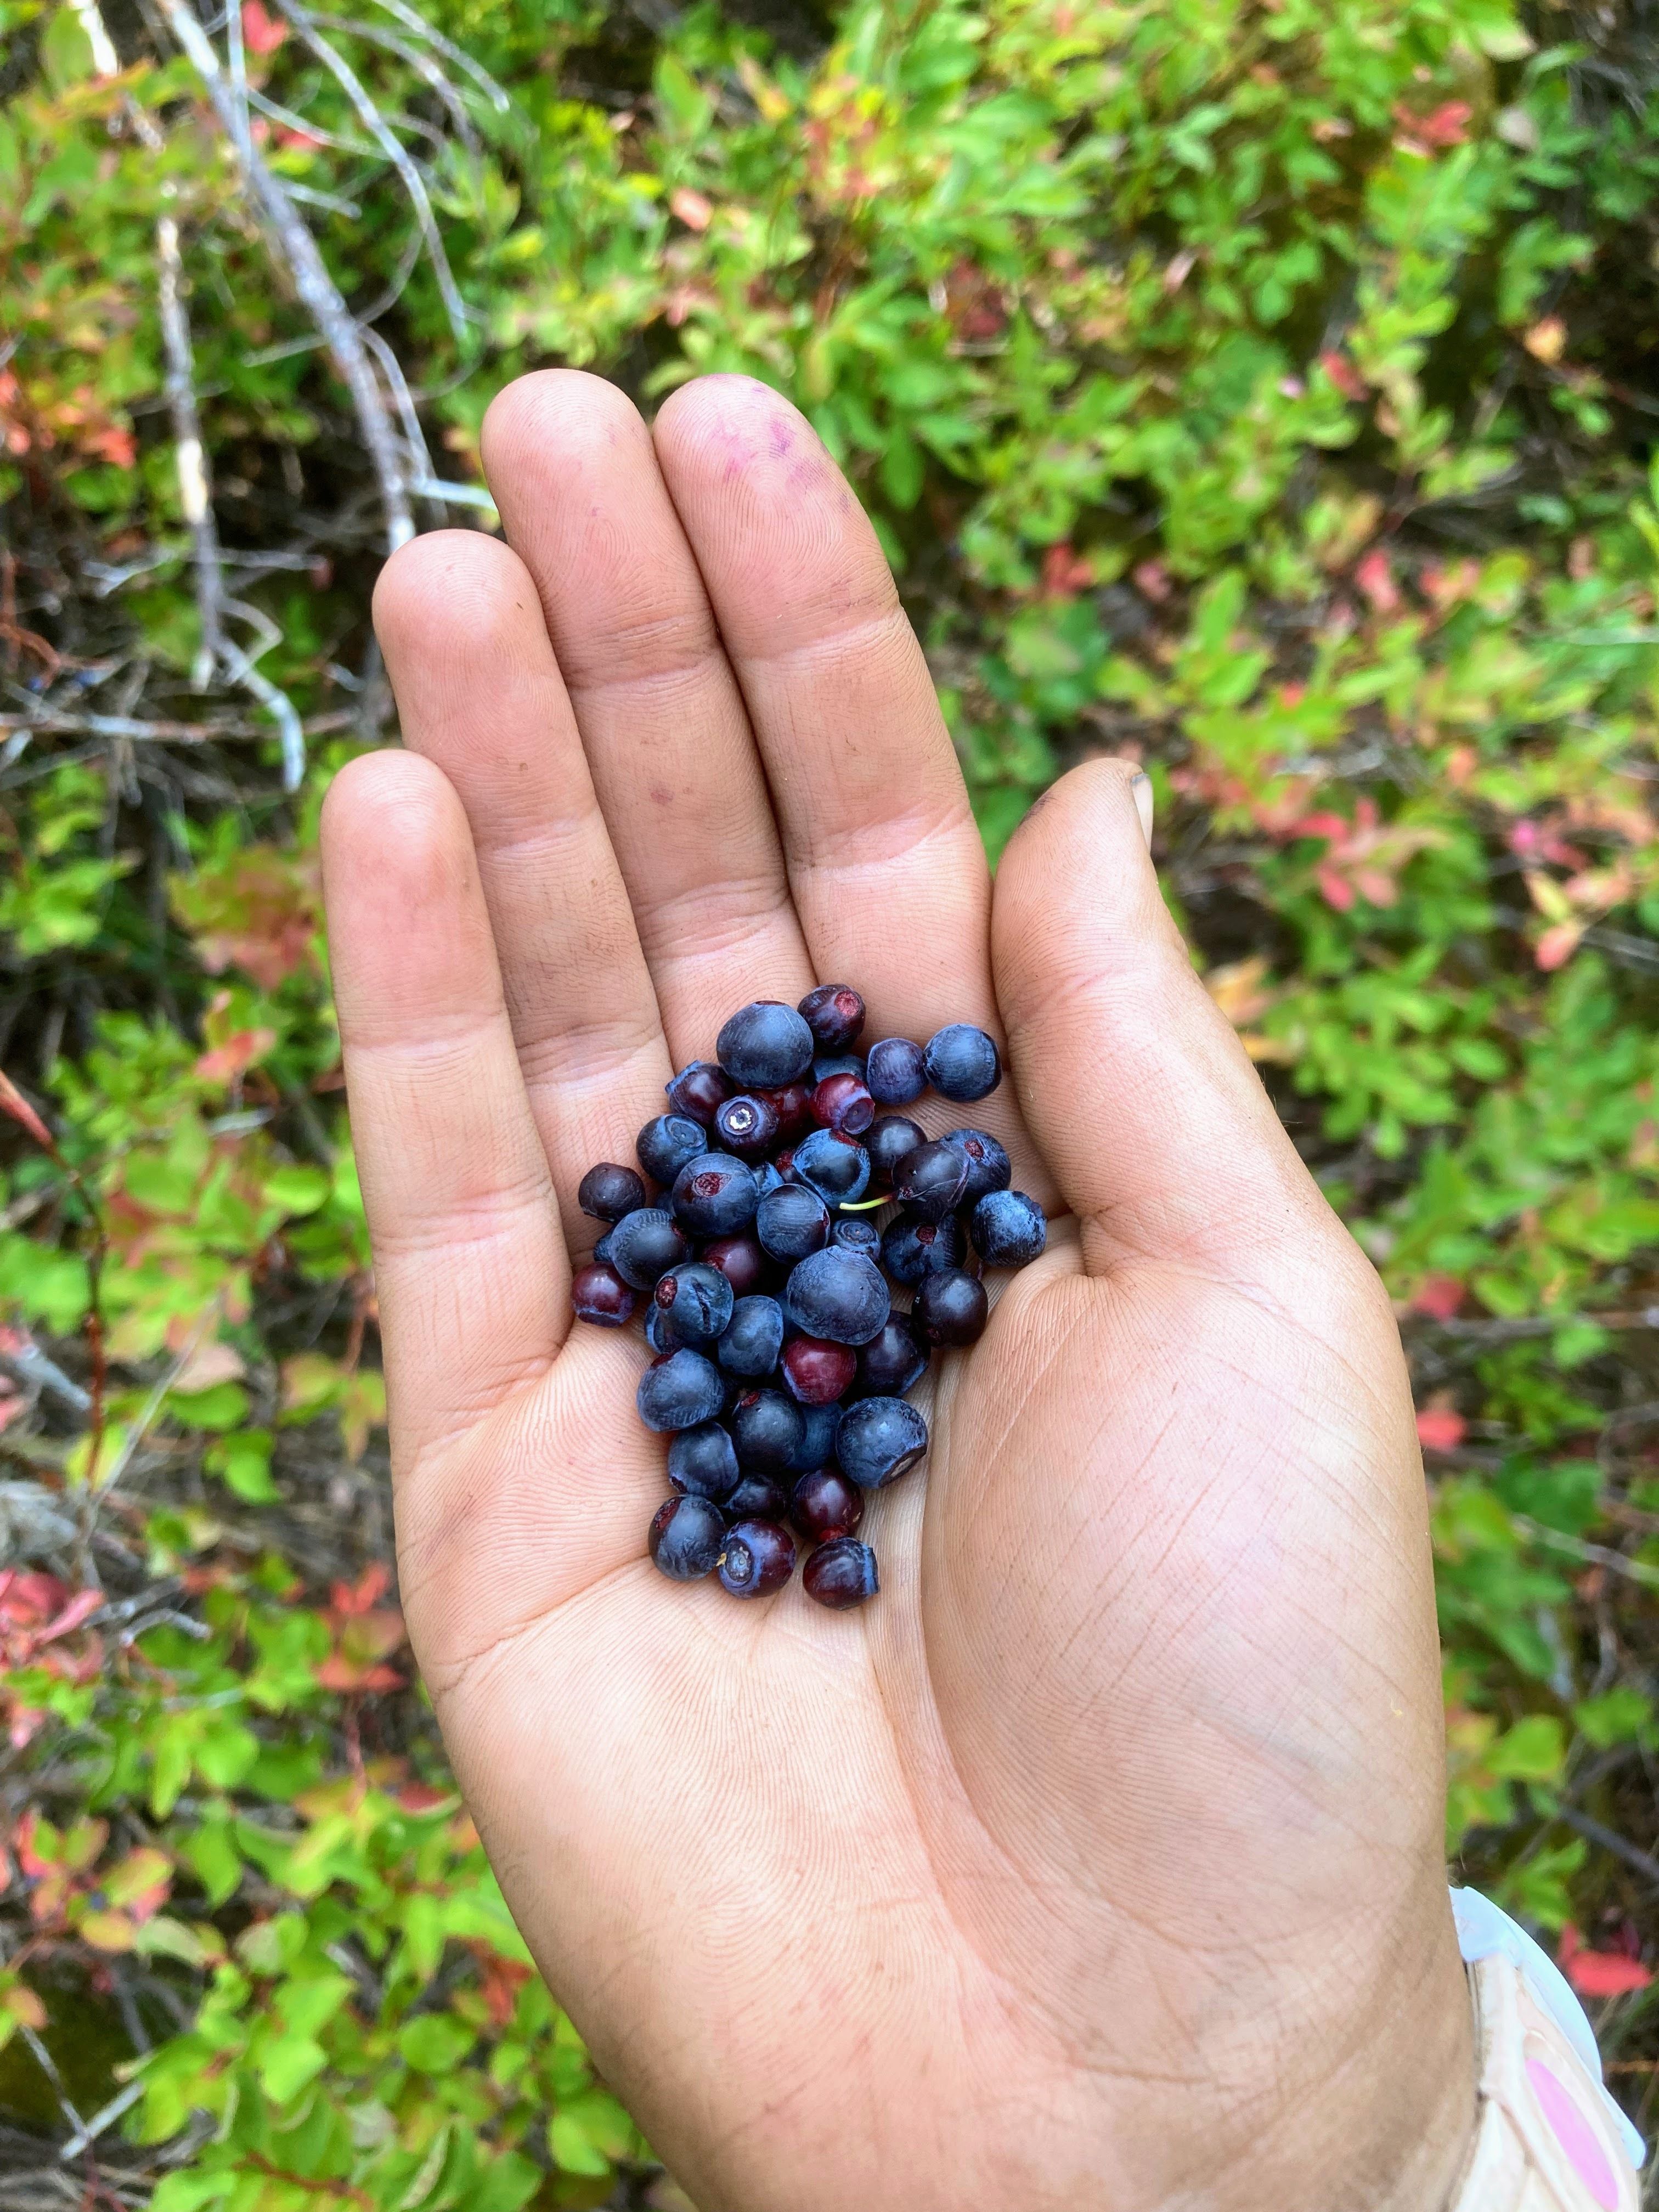 A hand cups a small amount of purple huckleberries.